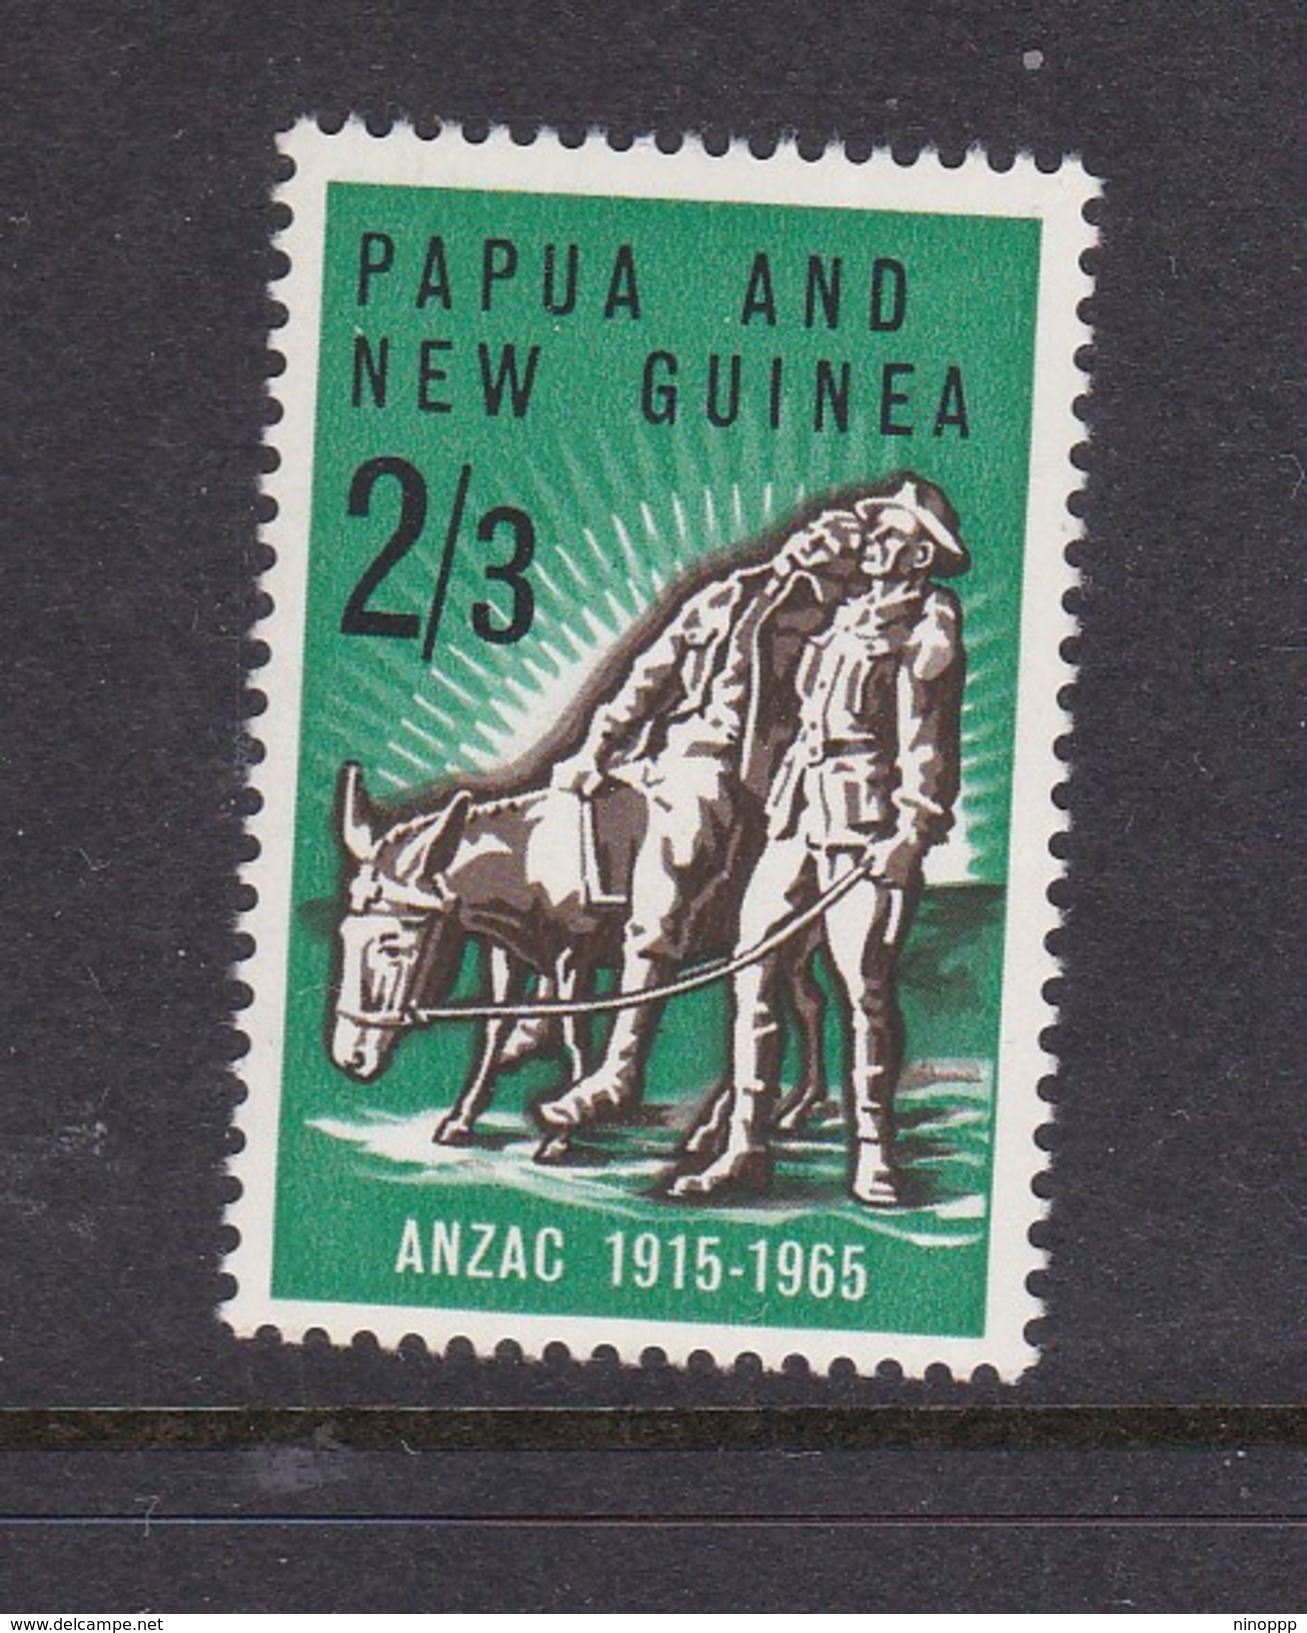 Papua New Guinea SG 76 1965 50th Anniversary Of Gallipoli Landing Mint Never Hinged - Papouasie-Nouvelle-Guinée